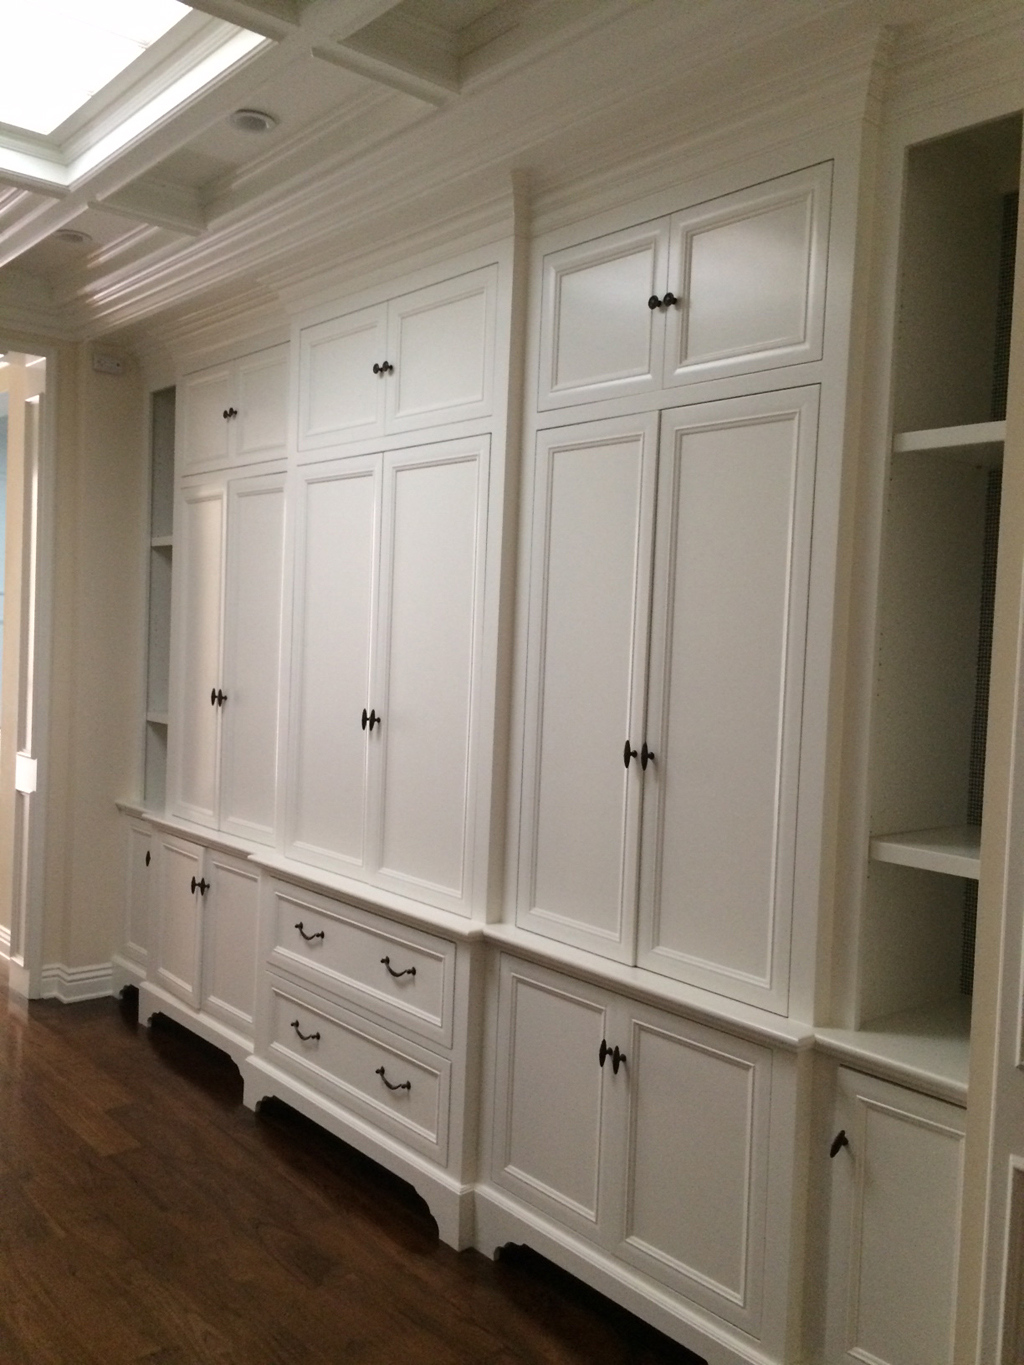 Custom linen closet with custom leg detail and beam & crown at ceiling